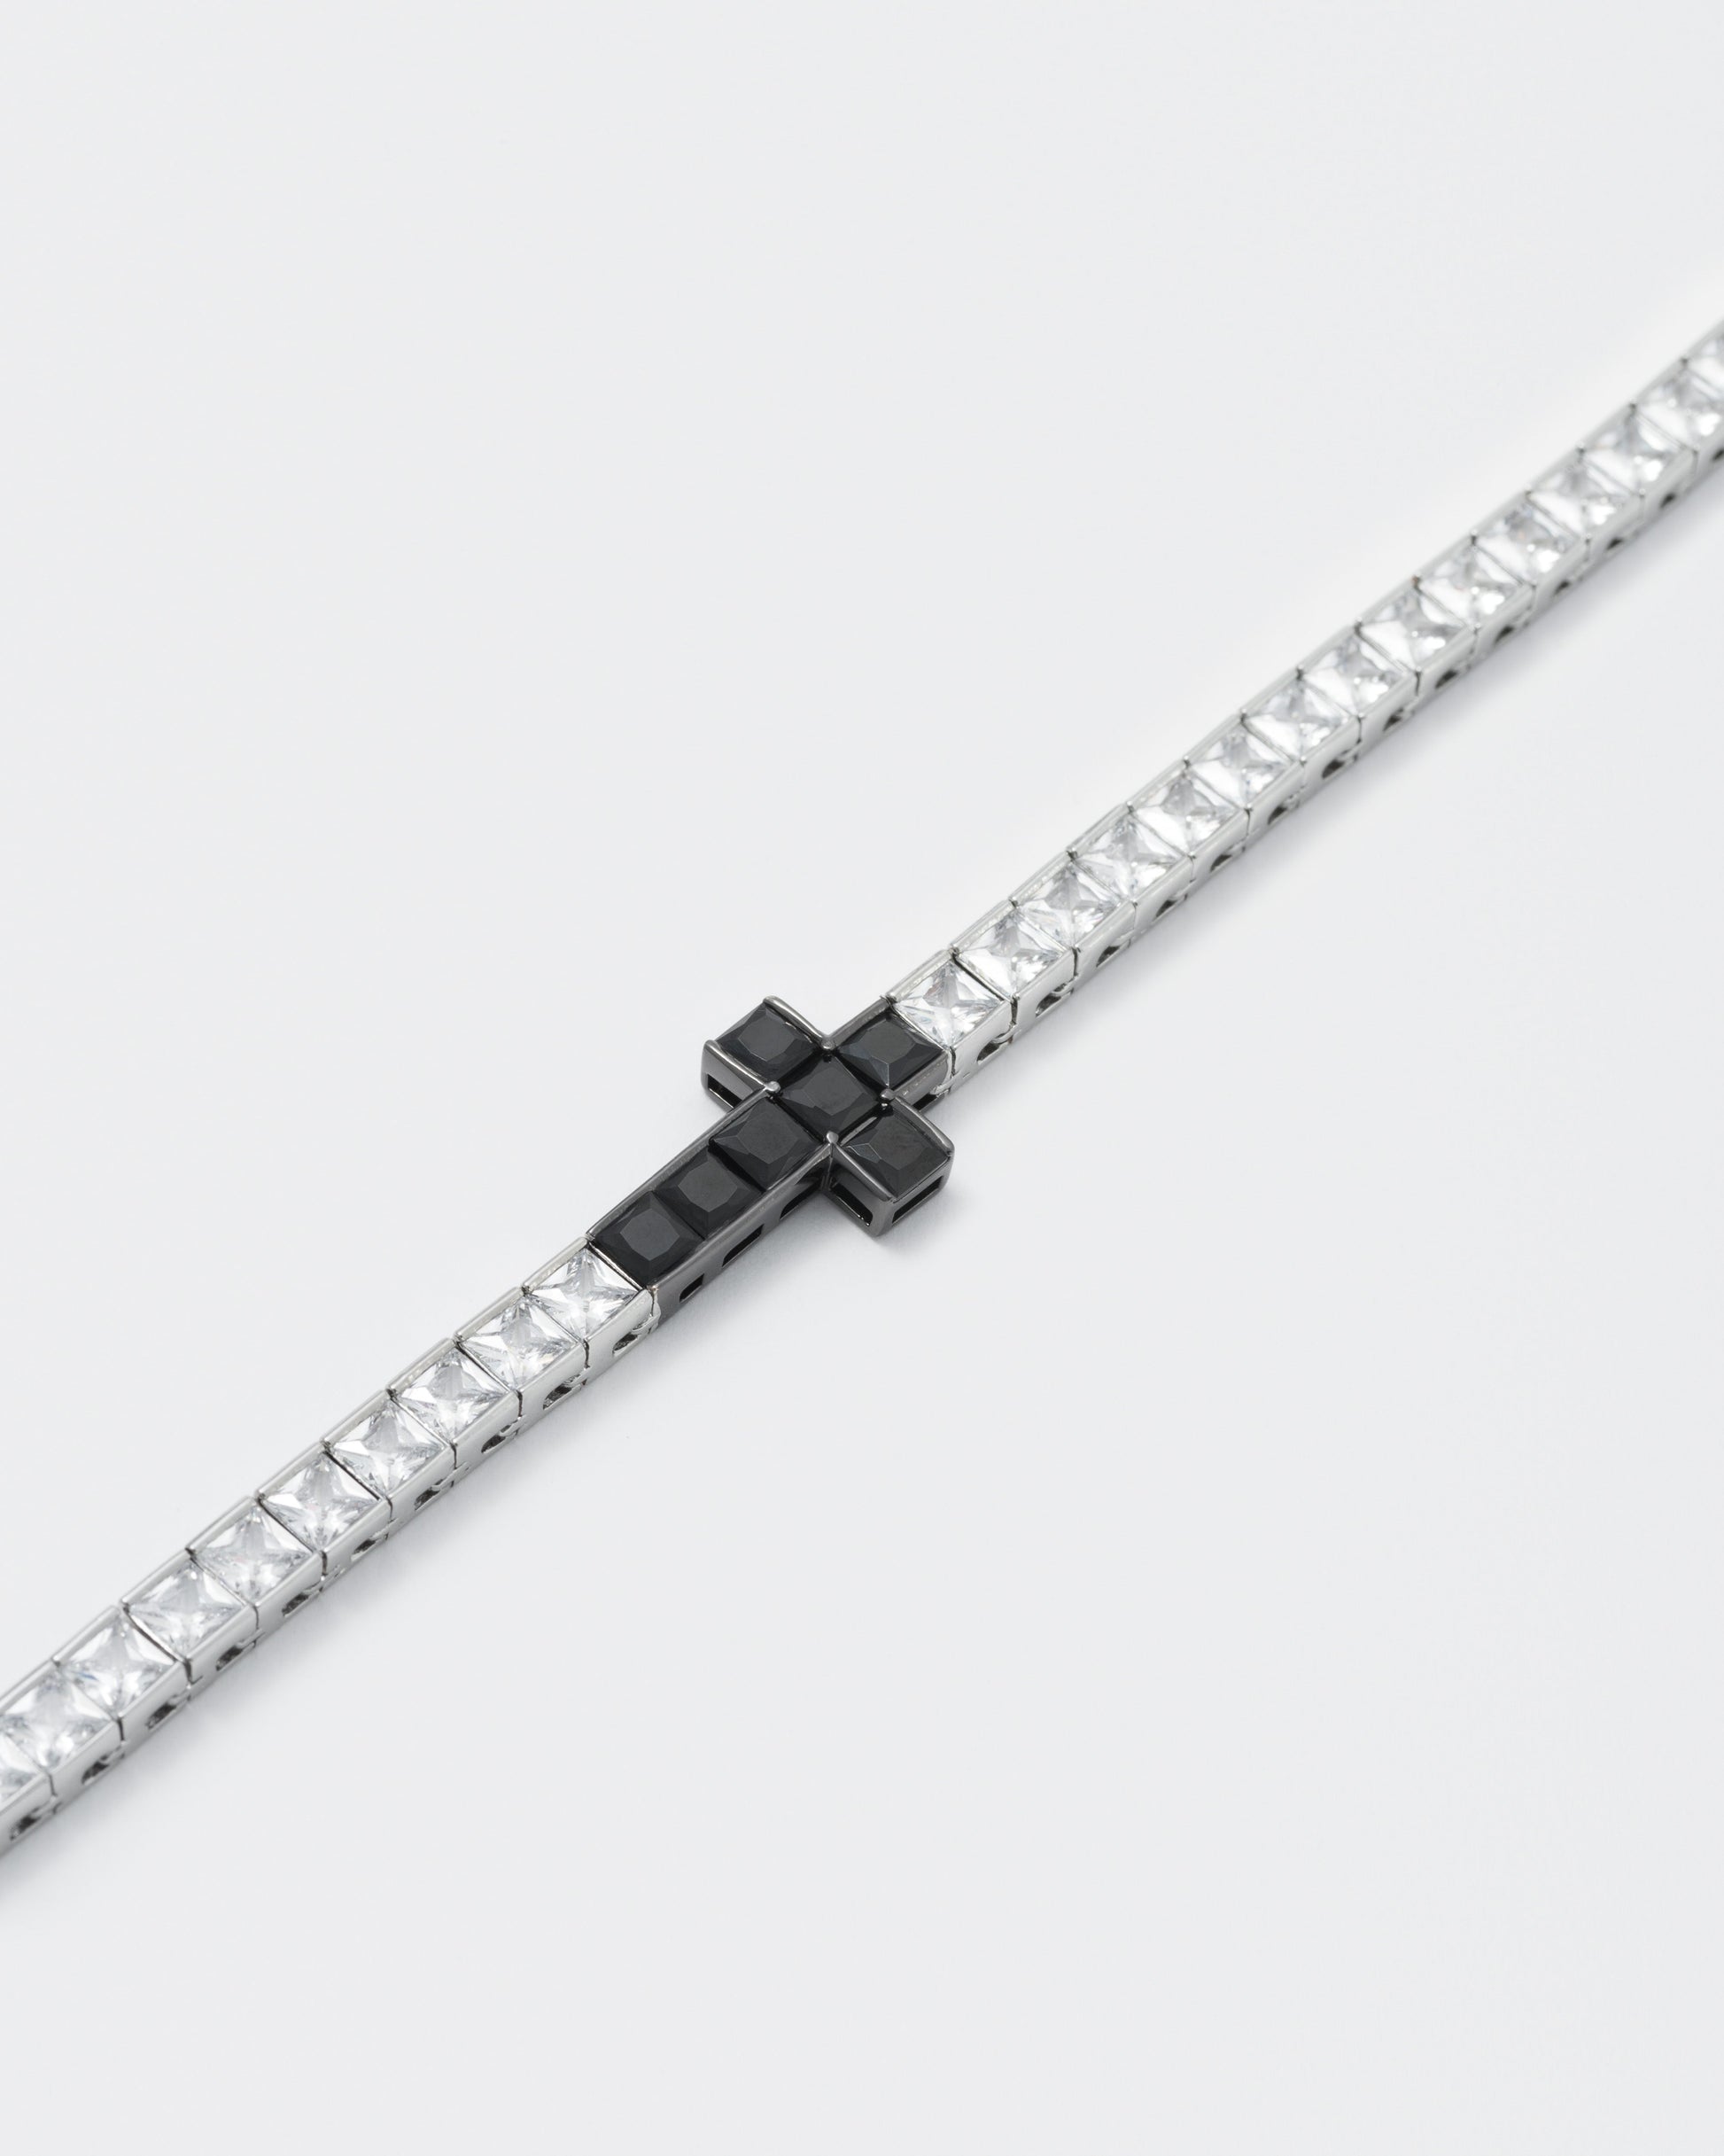 detail of 18k white gold and black coated tennis chain bracelet with contrasting cross element and hand-set princess-cut stones in white and black